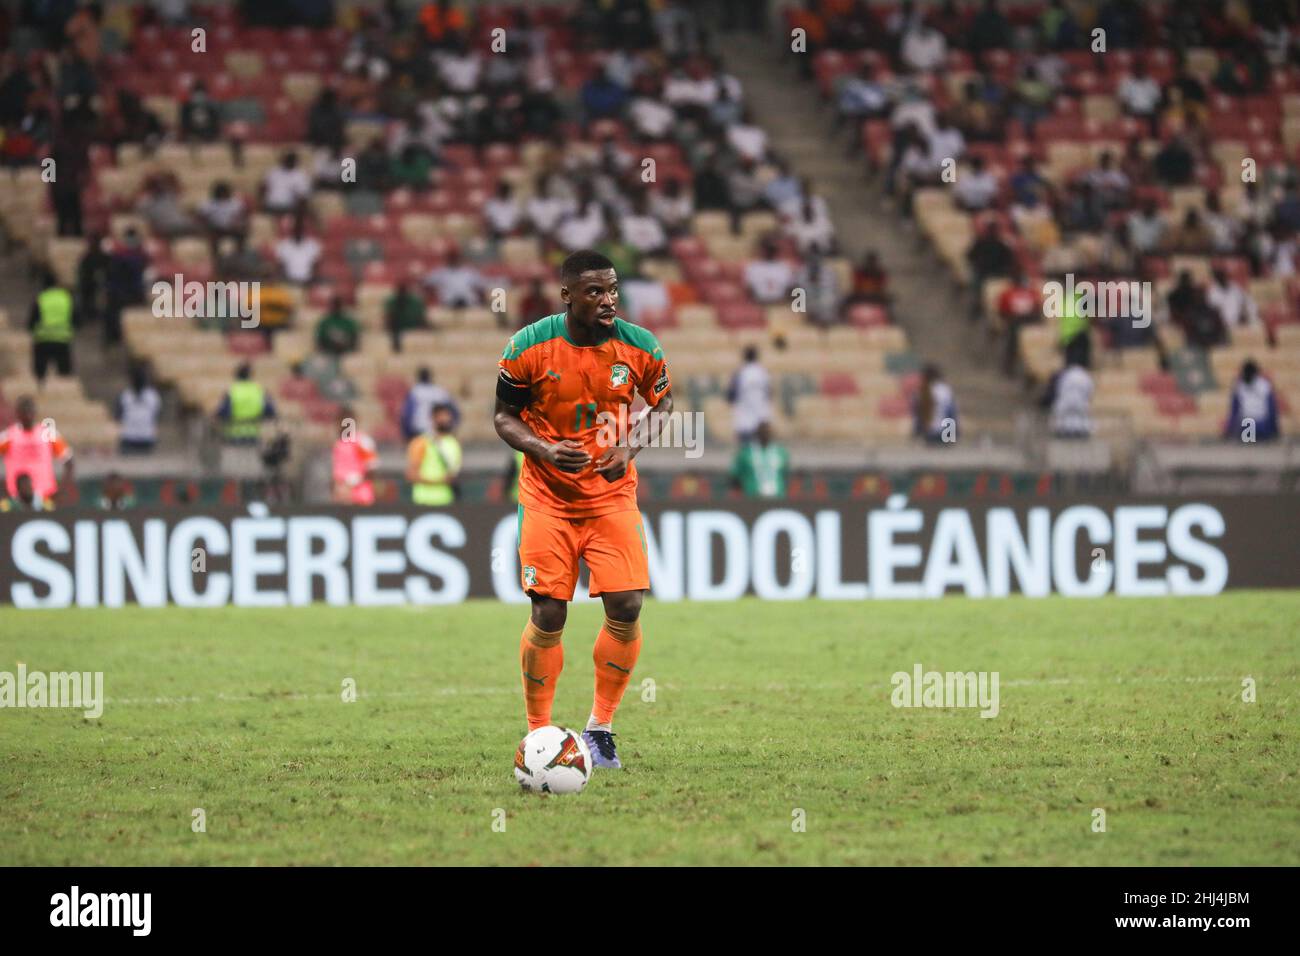 Douala, CAMEROON - JANUARY 26: Serge Aurier of Ivory Coast during the 2021 Africa Cup of Nations Play Offs - 1/8-finals match between Ivory Coast and Egypt at Japoma Stadium, Douala, January 26, 2022 in Douala, Cameroon. (Photo by SF) Credit: Sebo47/Alamy Live News Stock Photo